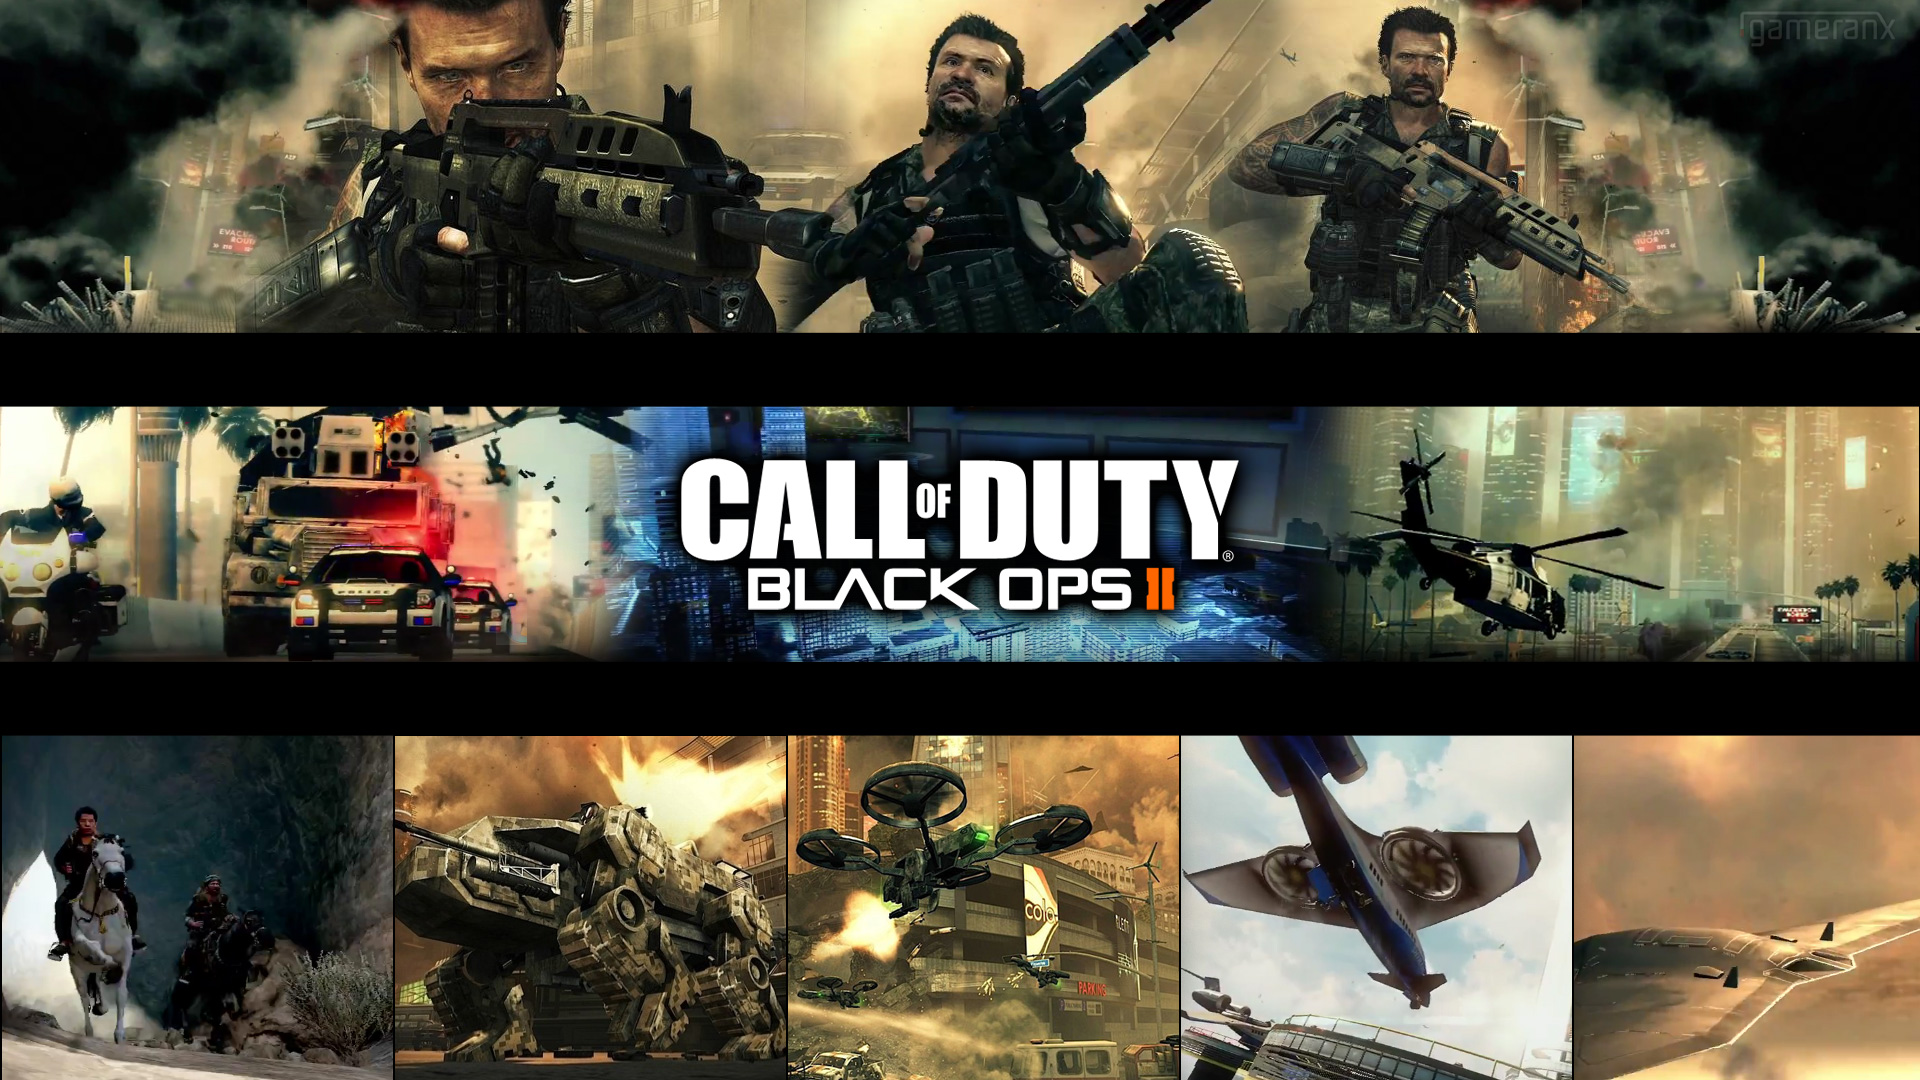 Black Ops 2 Wallpapers in HD Page 2 1920x1080